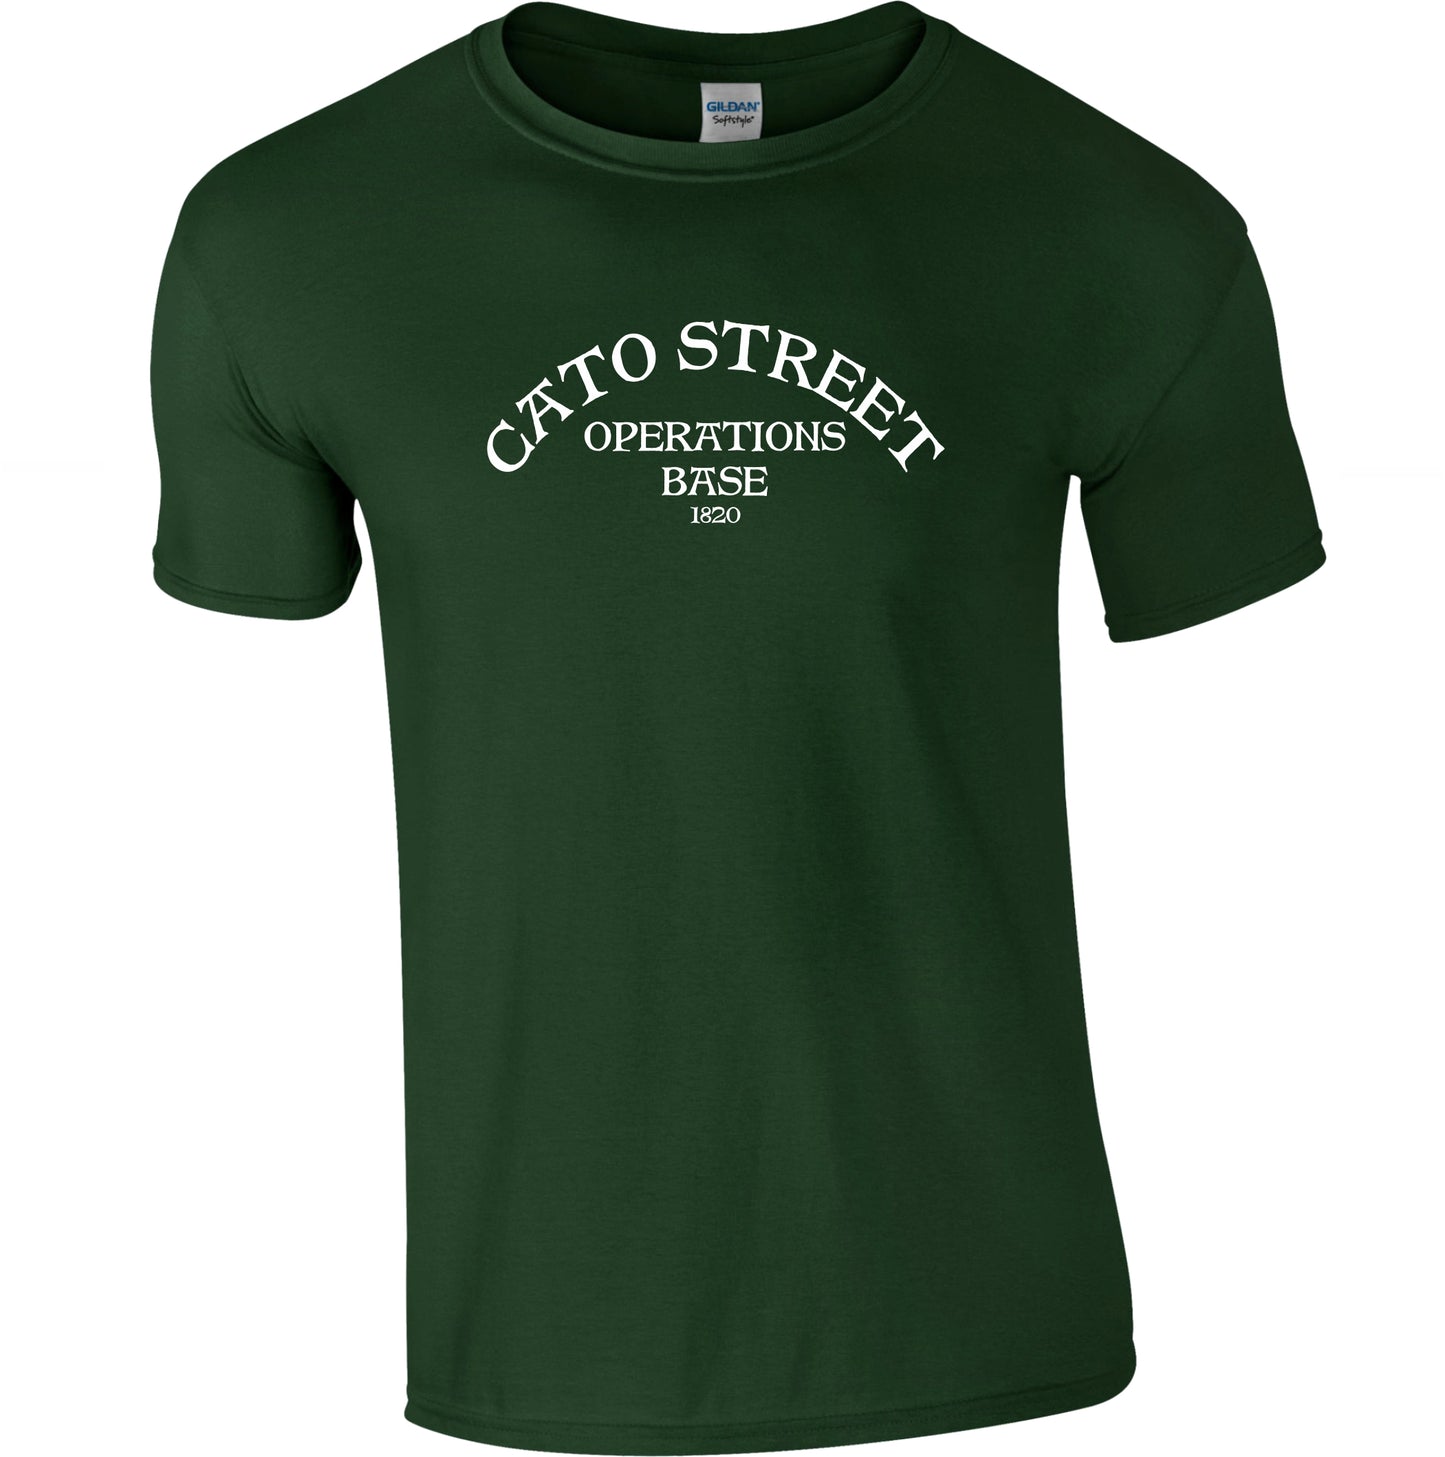 Cato Street Conspiracy T-Shirt - Political Protest Top - Various Colours